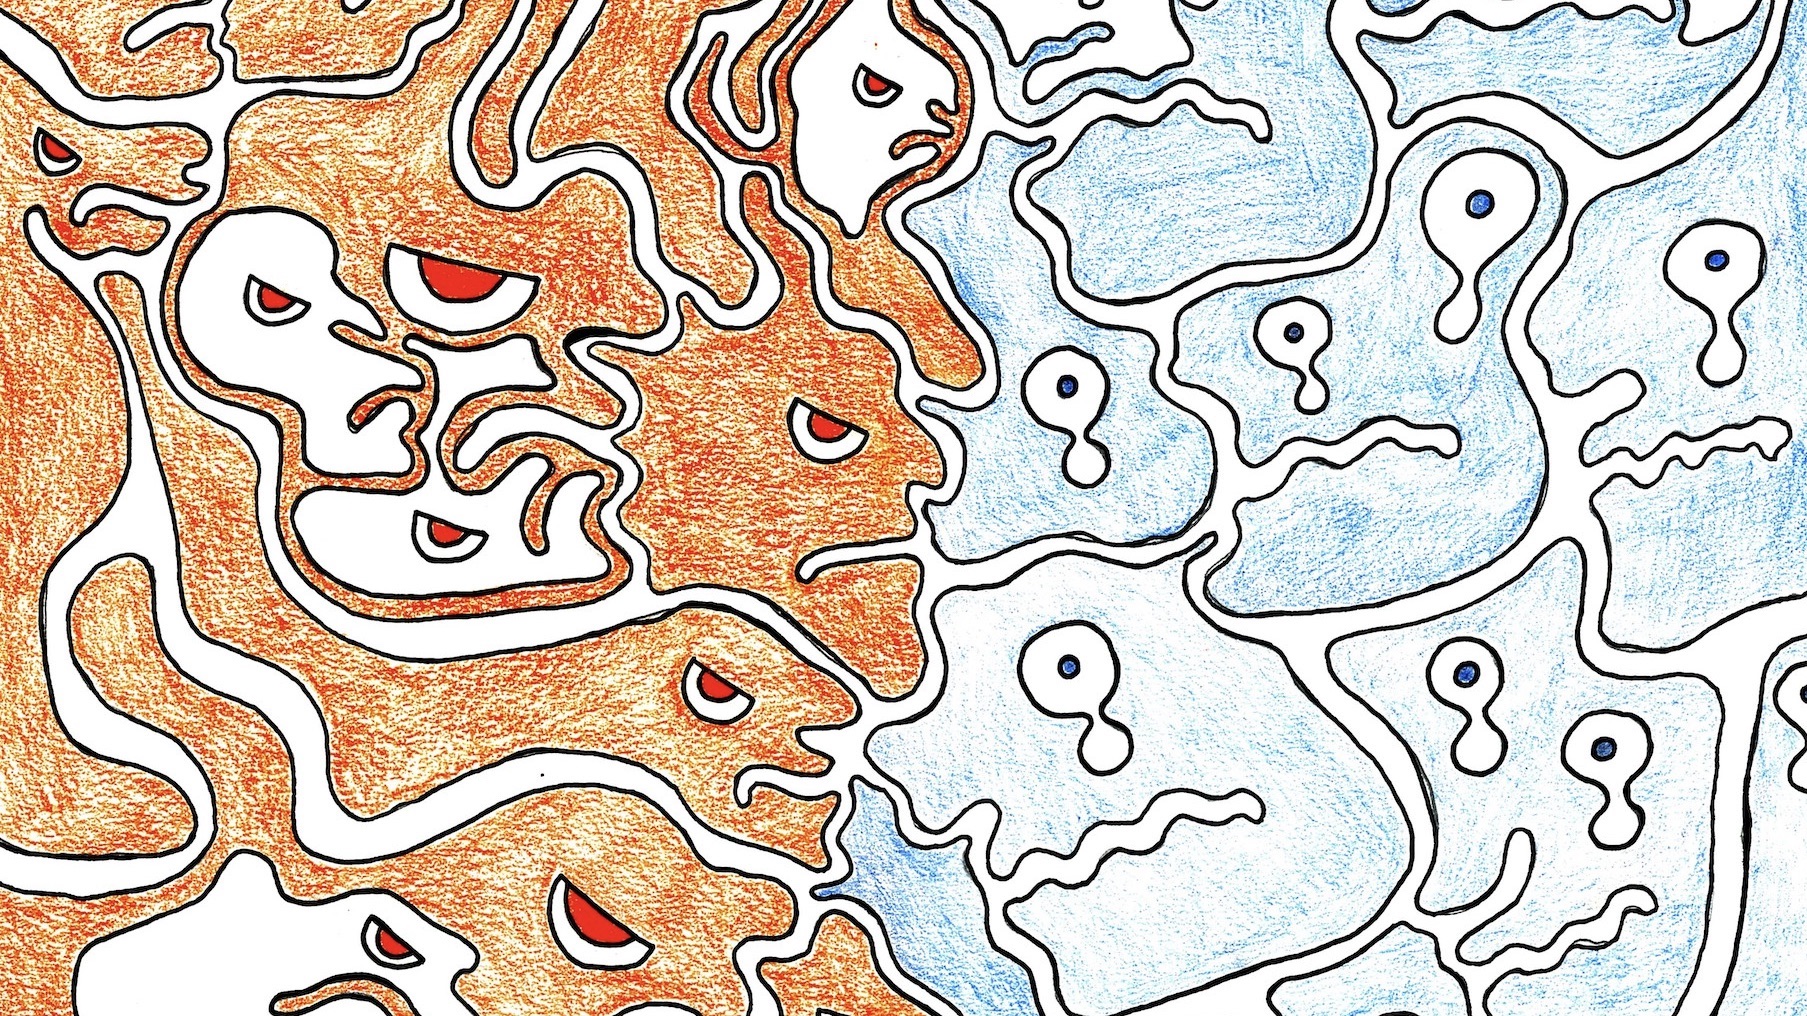 Abstract illustration of angry orange faces attacking frightened blue creatures.